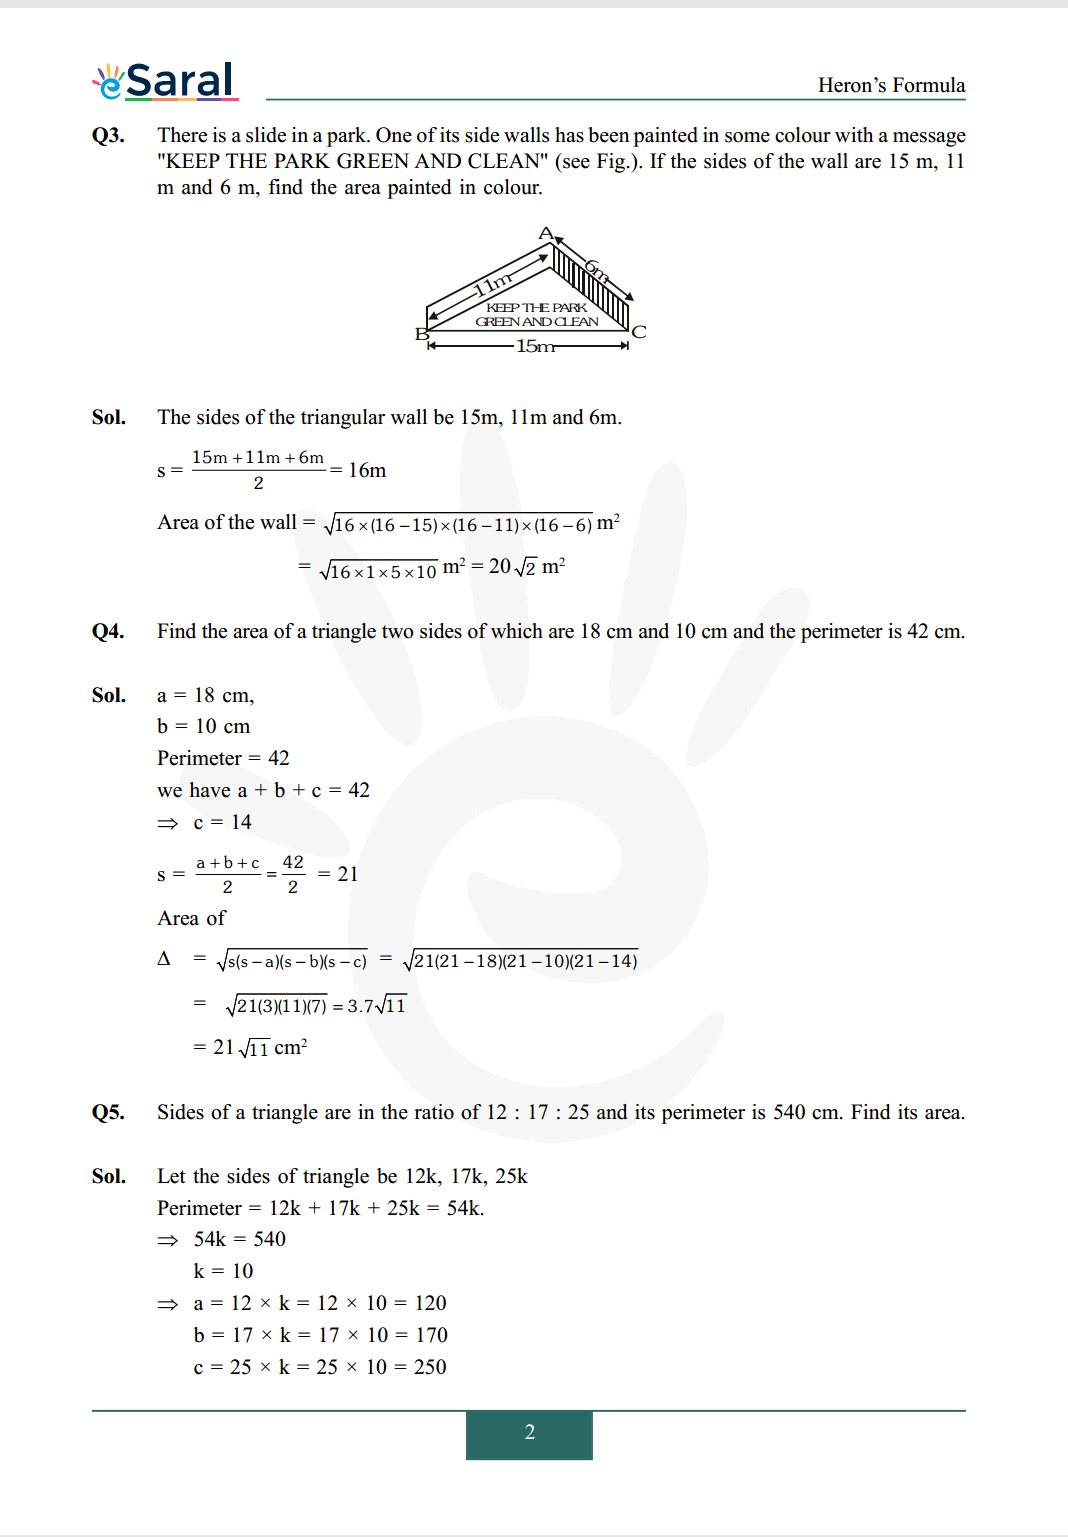 Class 9 maths chapter 12 exercise 12.1 solutions Image 2